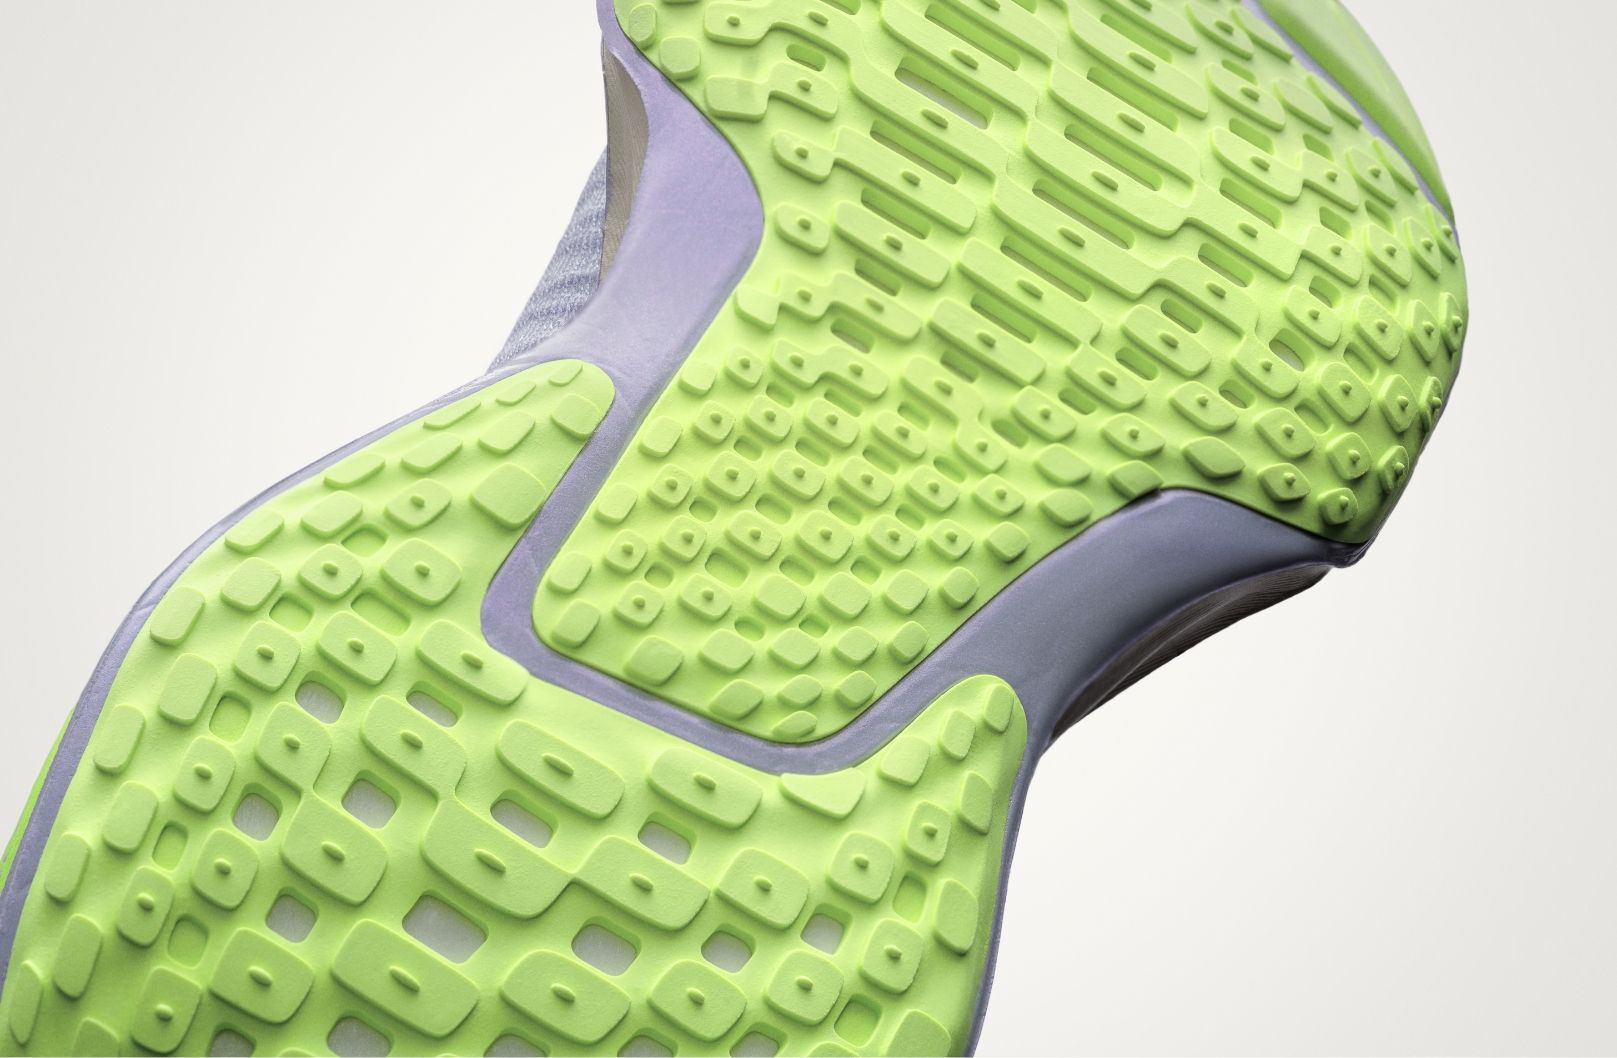 product shot of bottom tread on Nike Invincible 3. It is a bright neon green color.